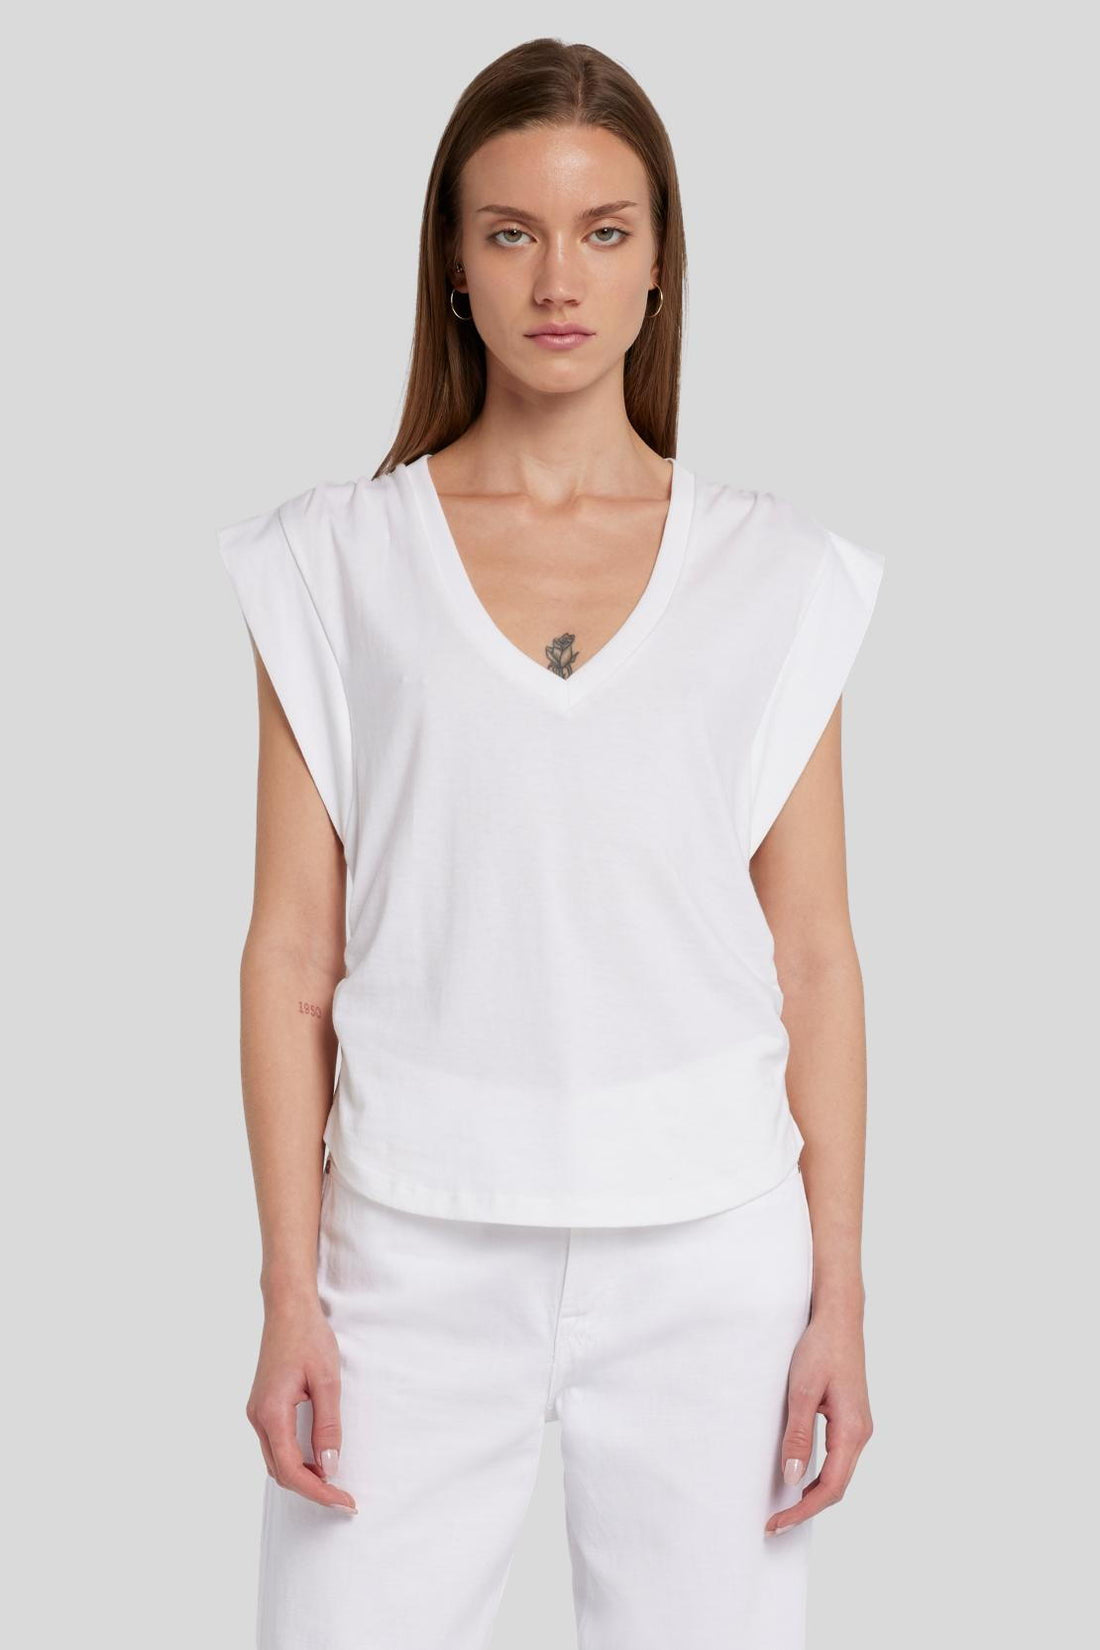 Pleated Sleeveless Tee Cotton White_JSLL5770WH_WH_01